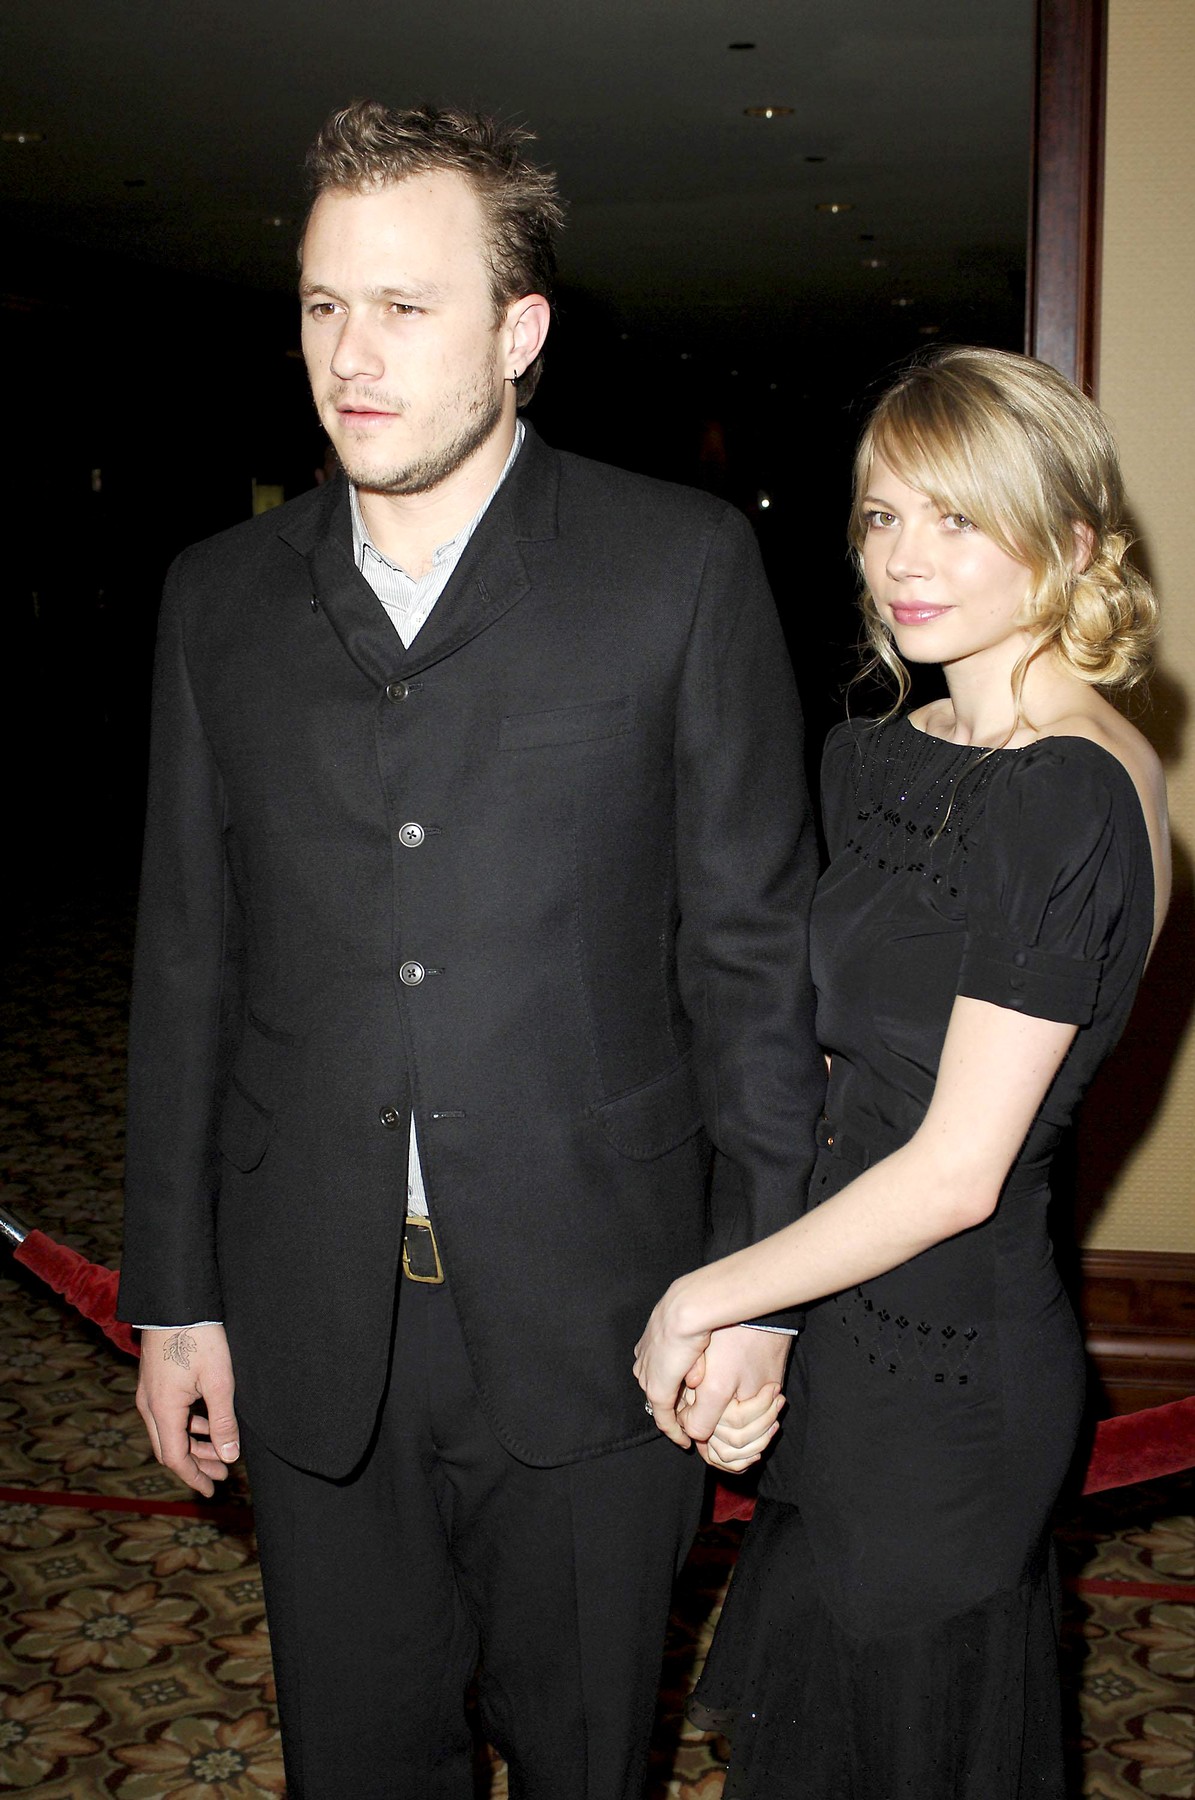 Heath Ledger, Michelle Williams at arrivals for 58th Annual Directors Guild of America DGA Awards, The Hyatt Regency Century Plaza Hotel & Spa, Los Angeles, CA,  January 28, 2006.,Image: 96930166, License: Rights-managed, Restrictions: , Model Release: no, Credit line: Michael GermanaCollecti / Everett / Profimedia